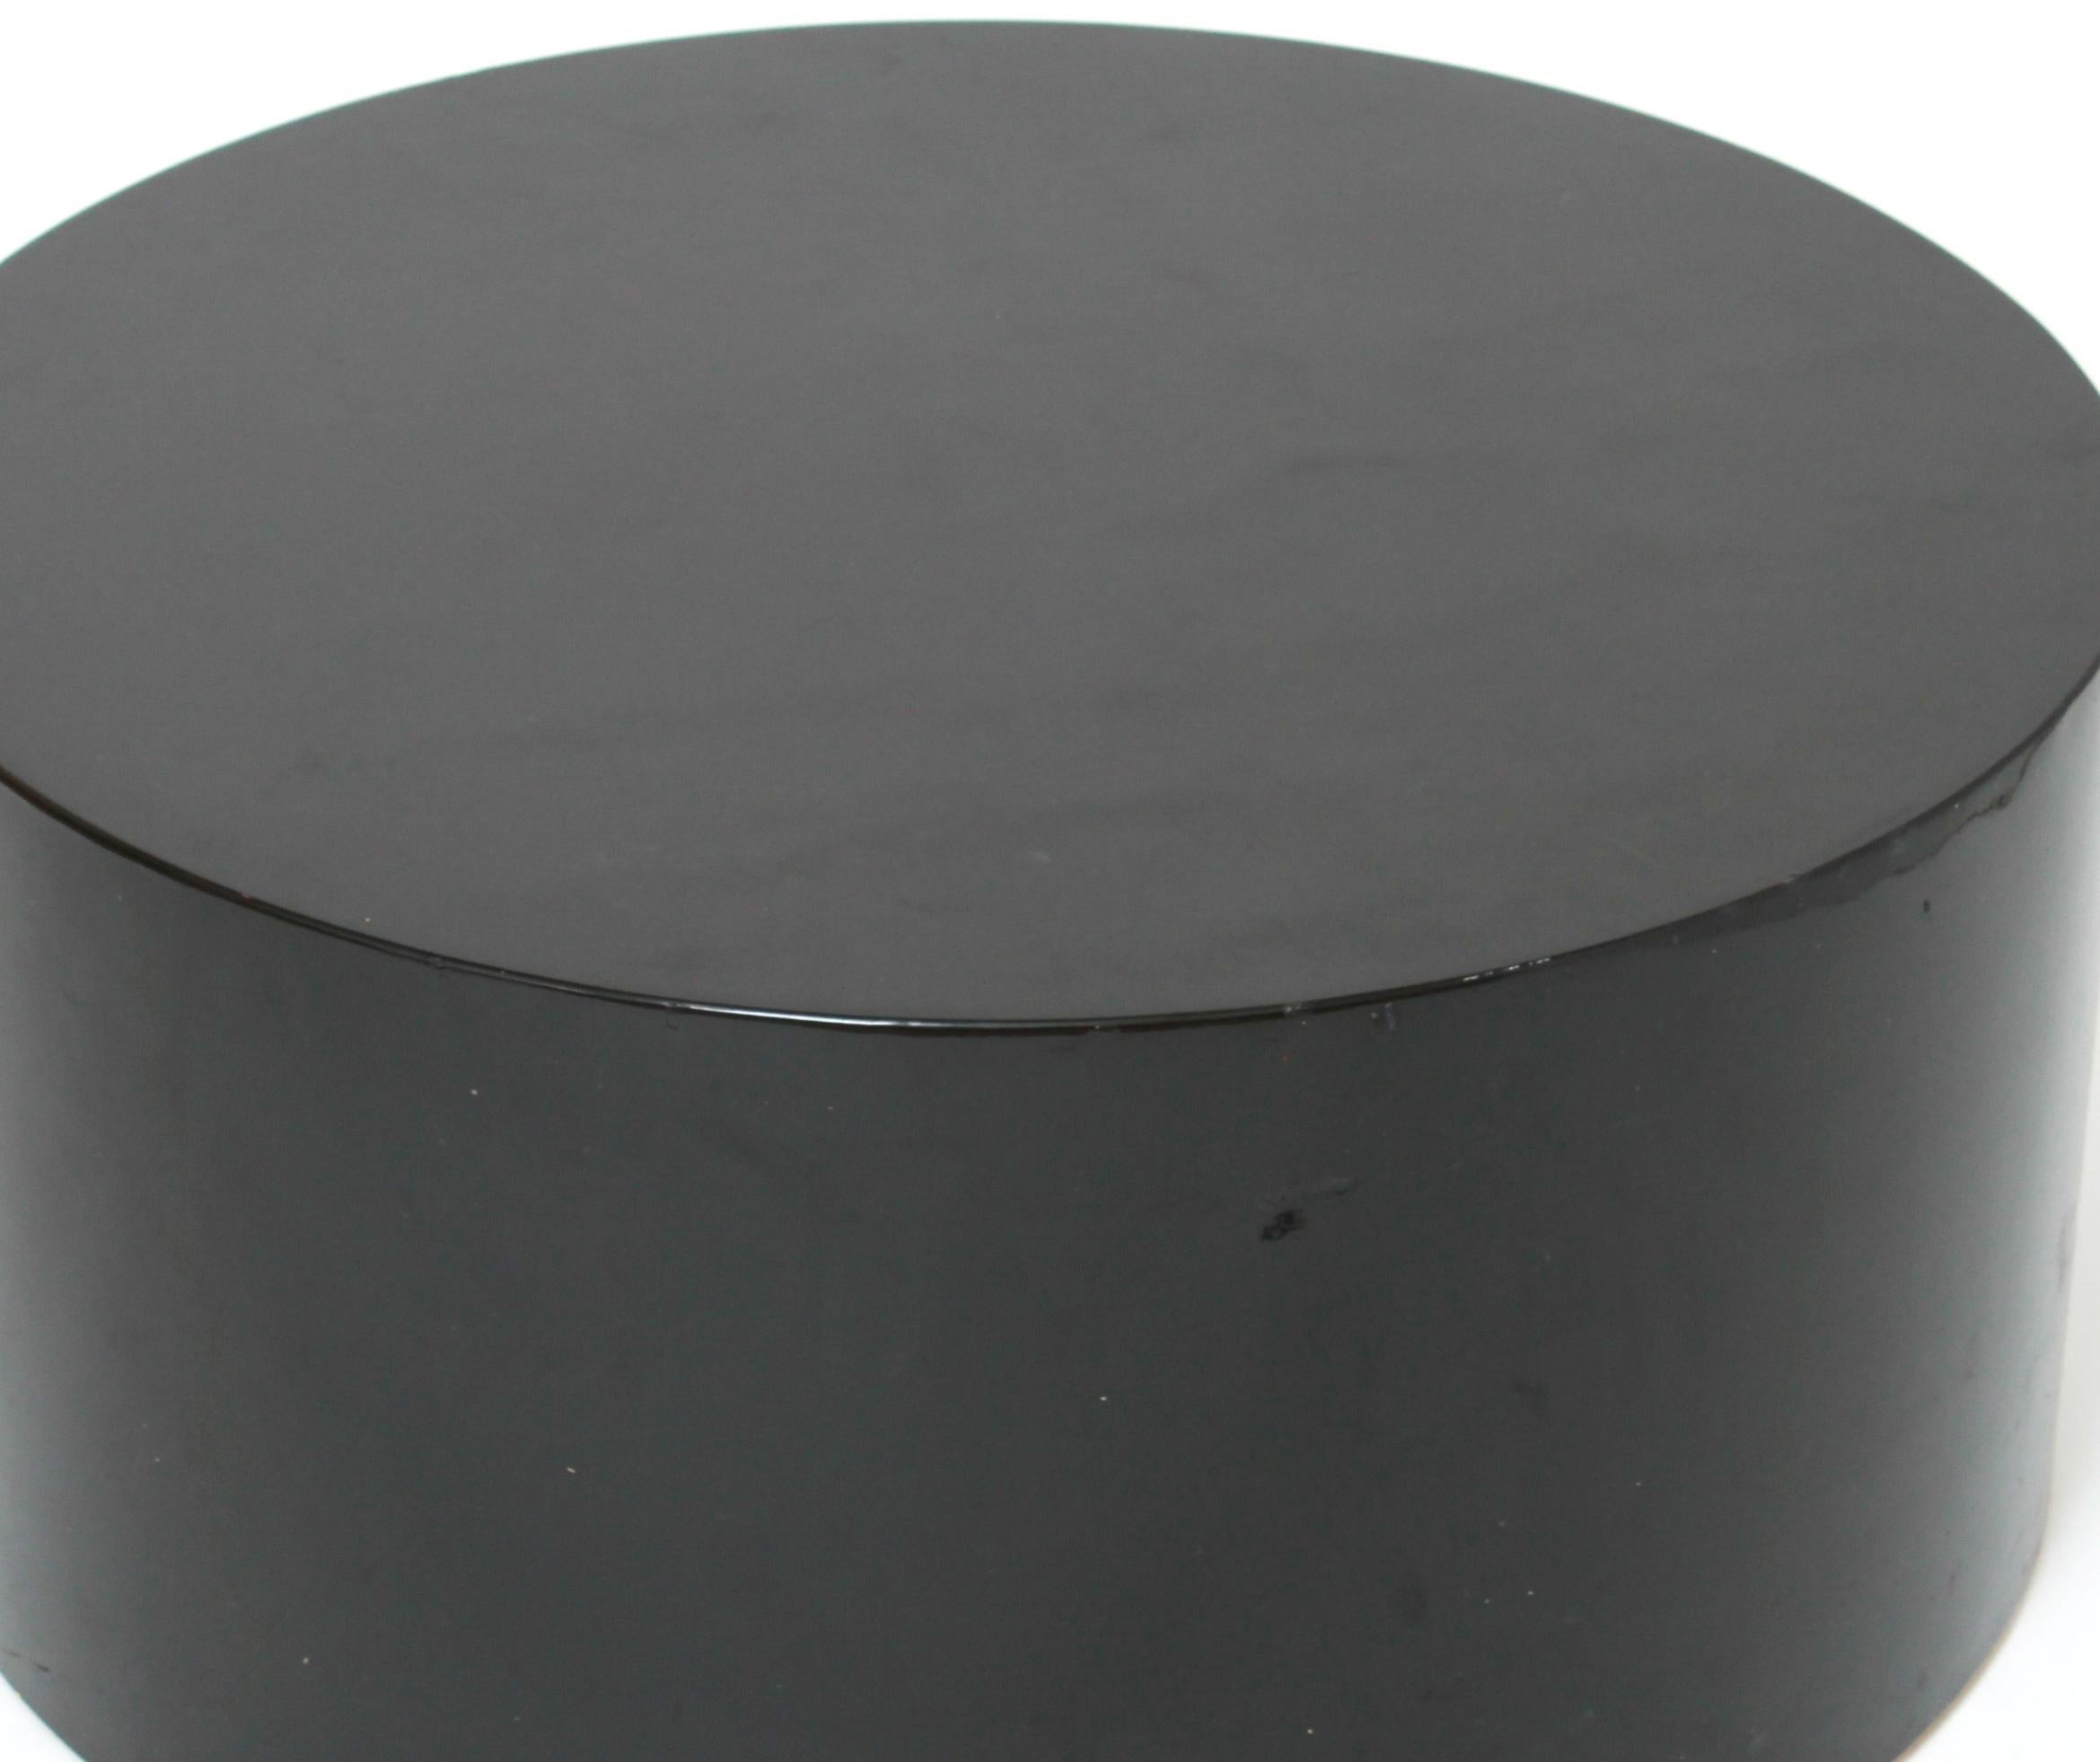 Intrex habitat modern black enameled wood round low table or pedestal with a maker's label on the underside. Measures: 15.25